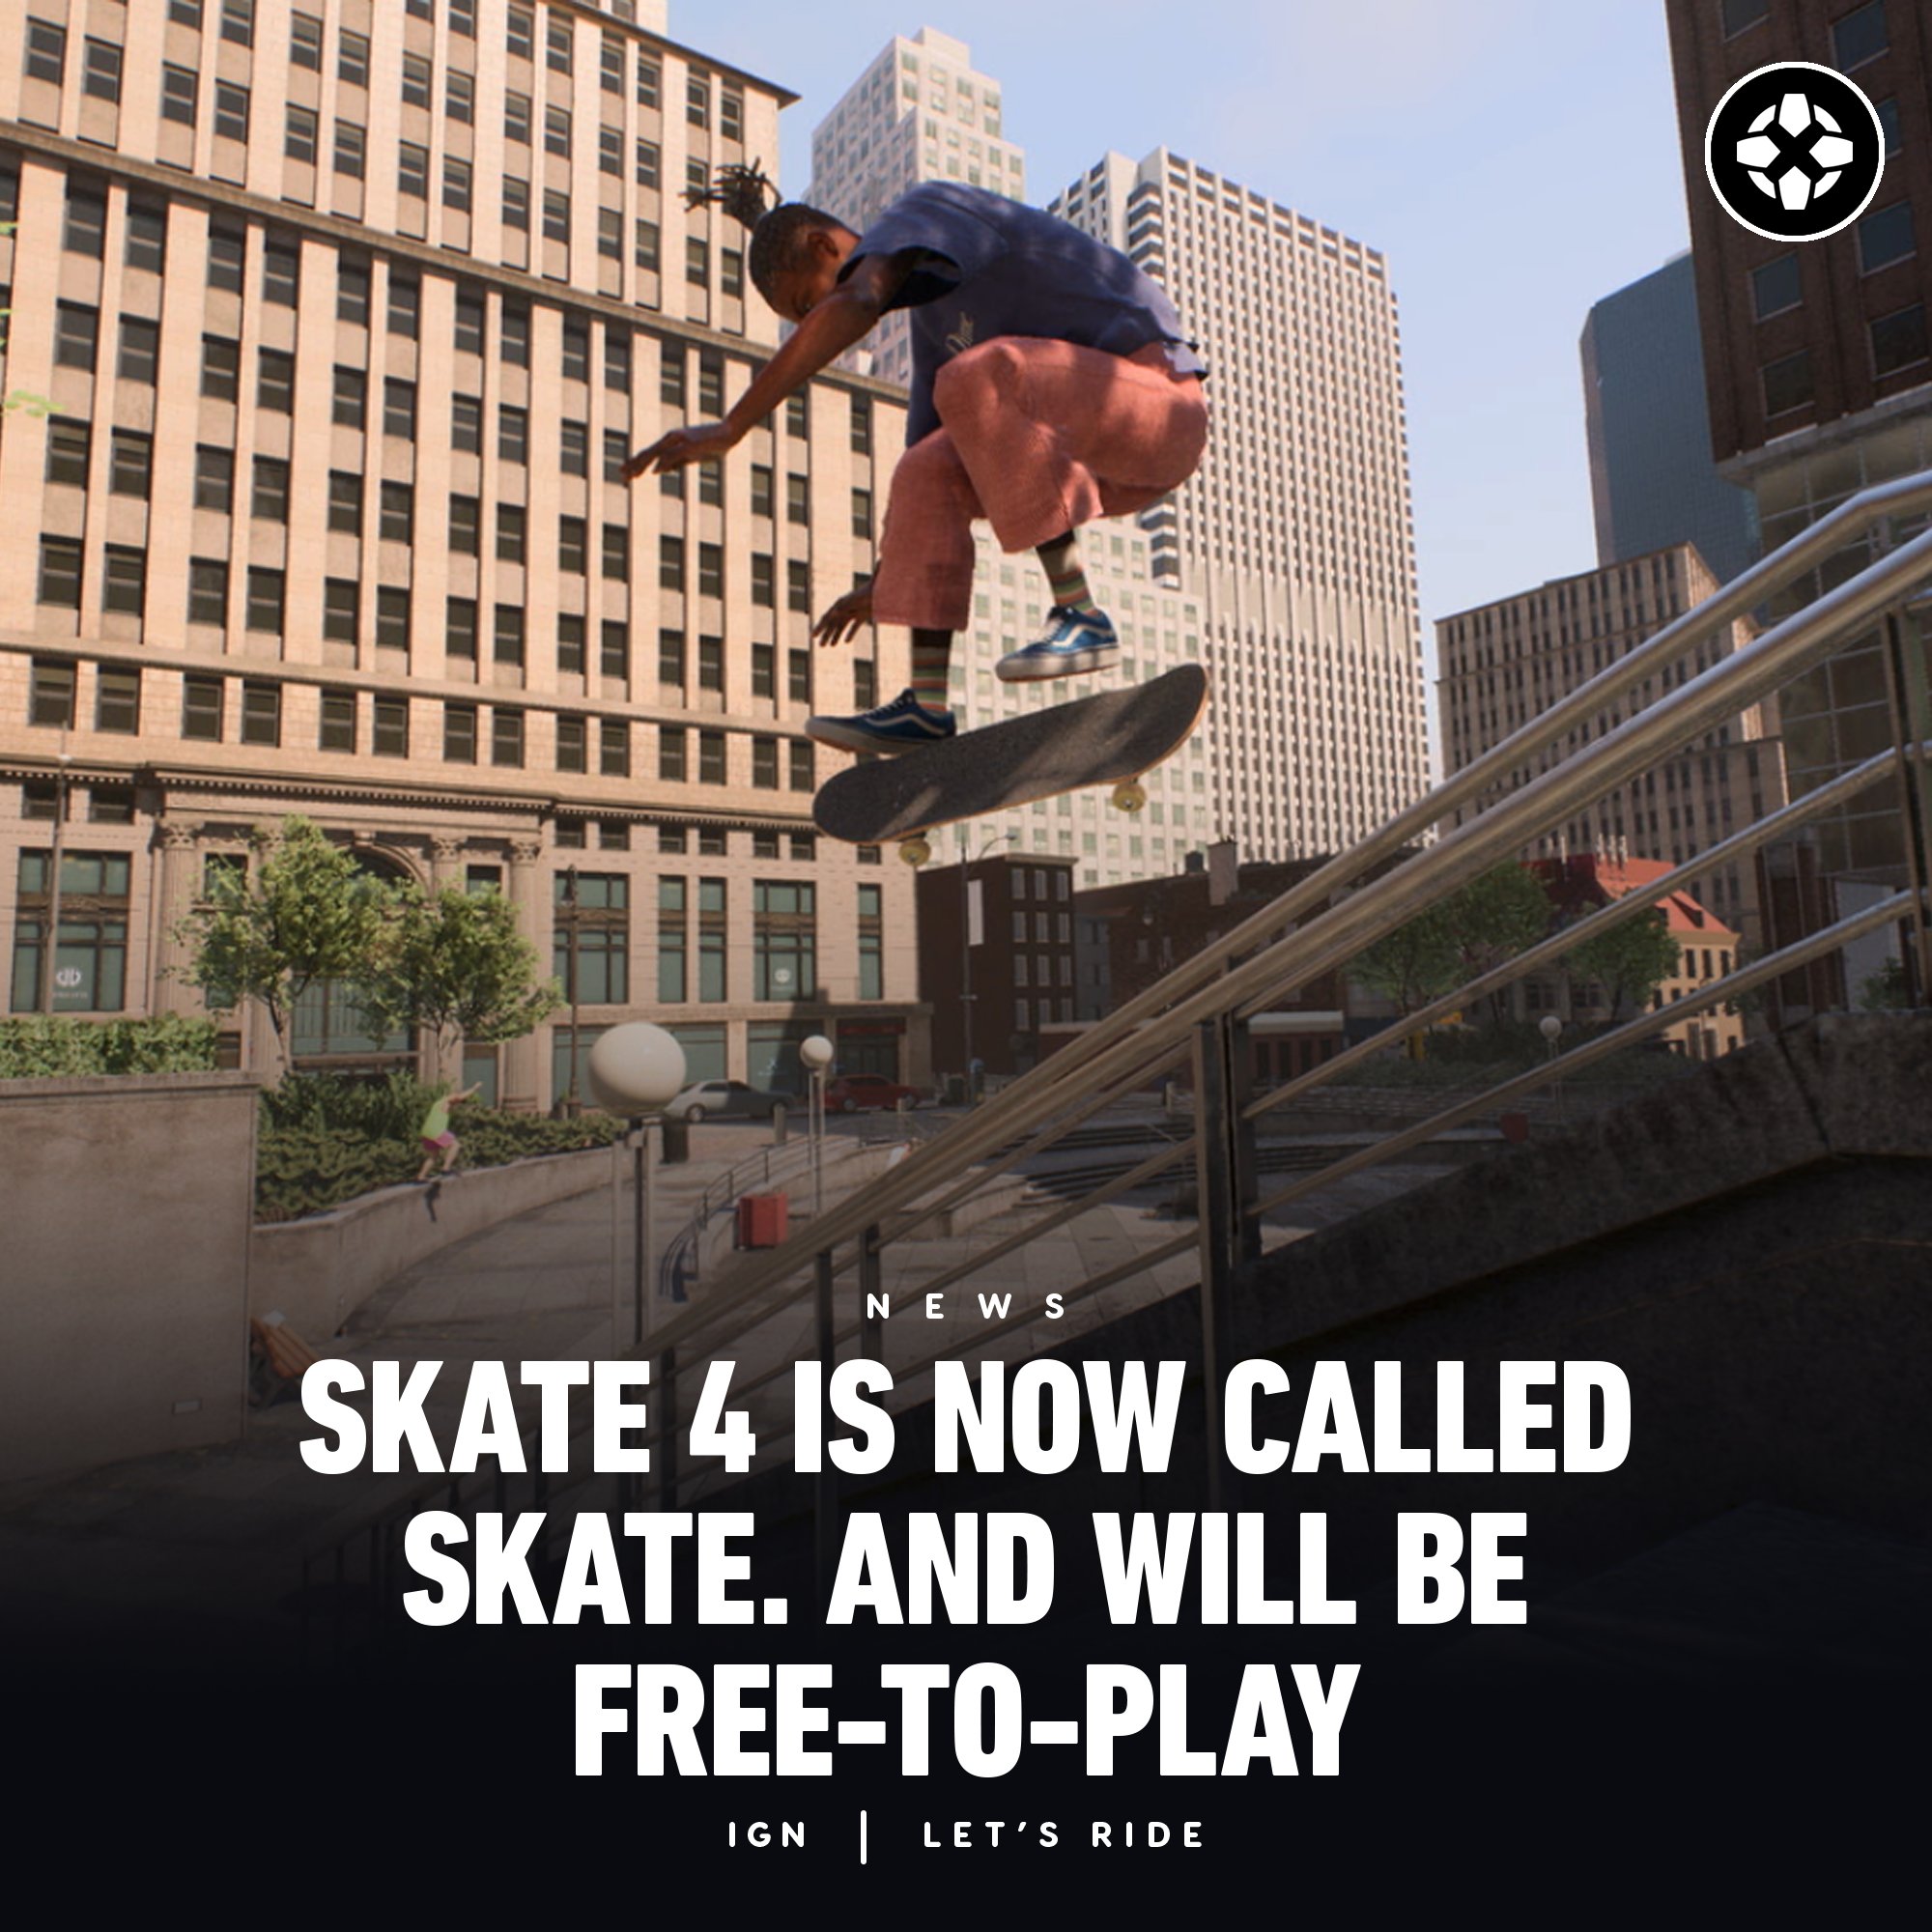 I love the way the Devs are doing this! #skate. #skate4gameplay #skate